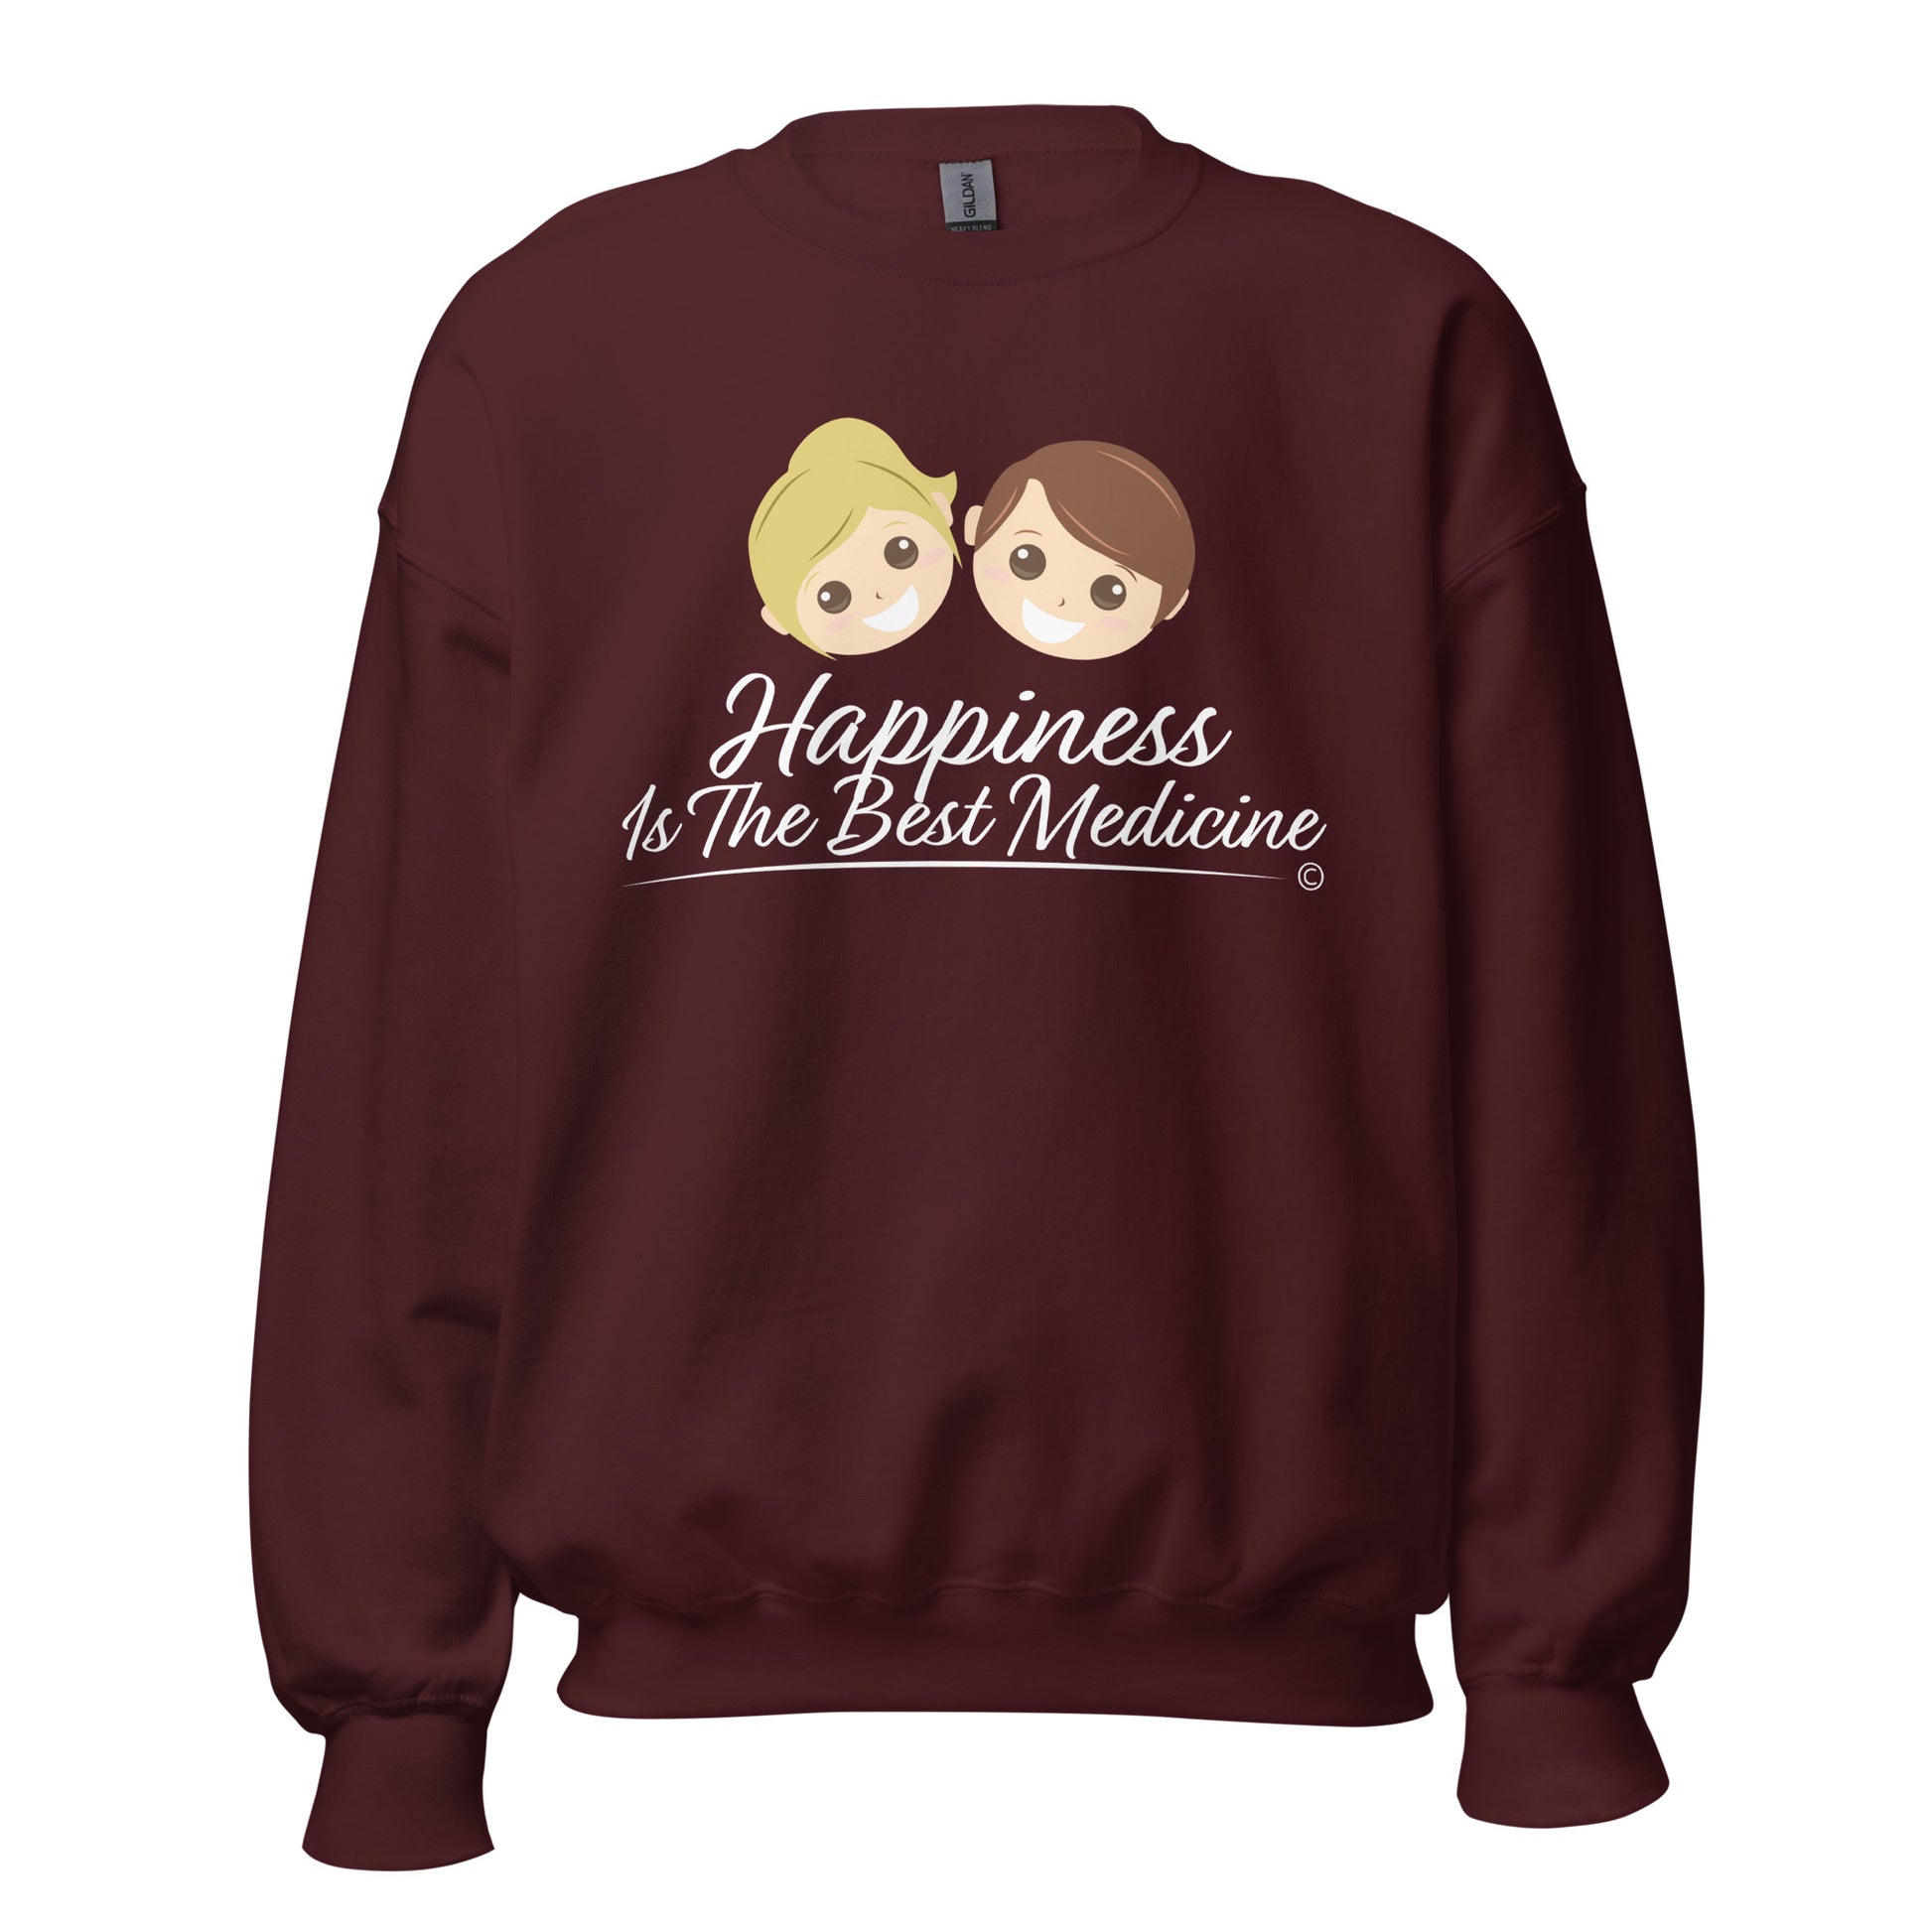 Soft and cozy sweatshirt for all- Maroon